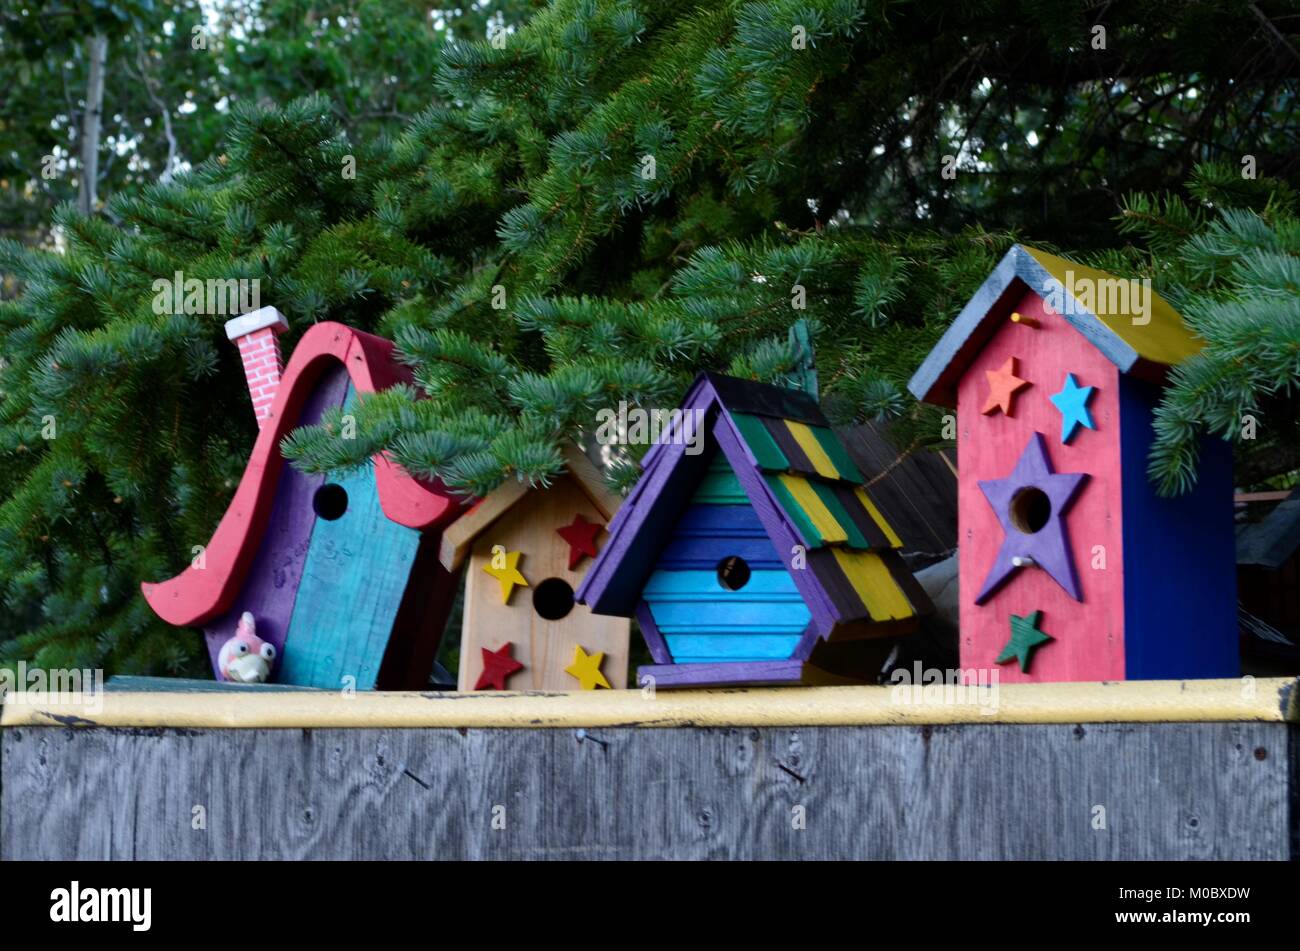 Brightly colored painted birdhouses sitting in a row, underneath a green spruce tree. Stock Photo